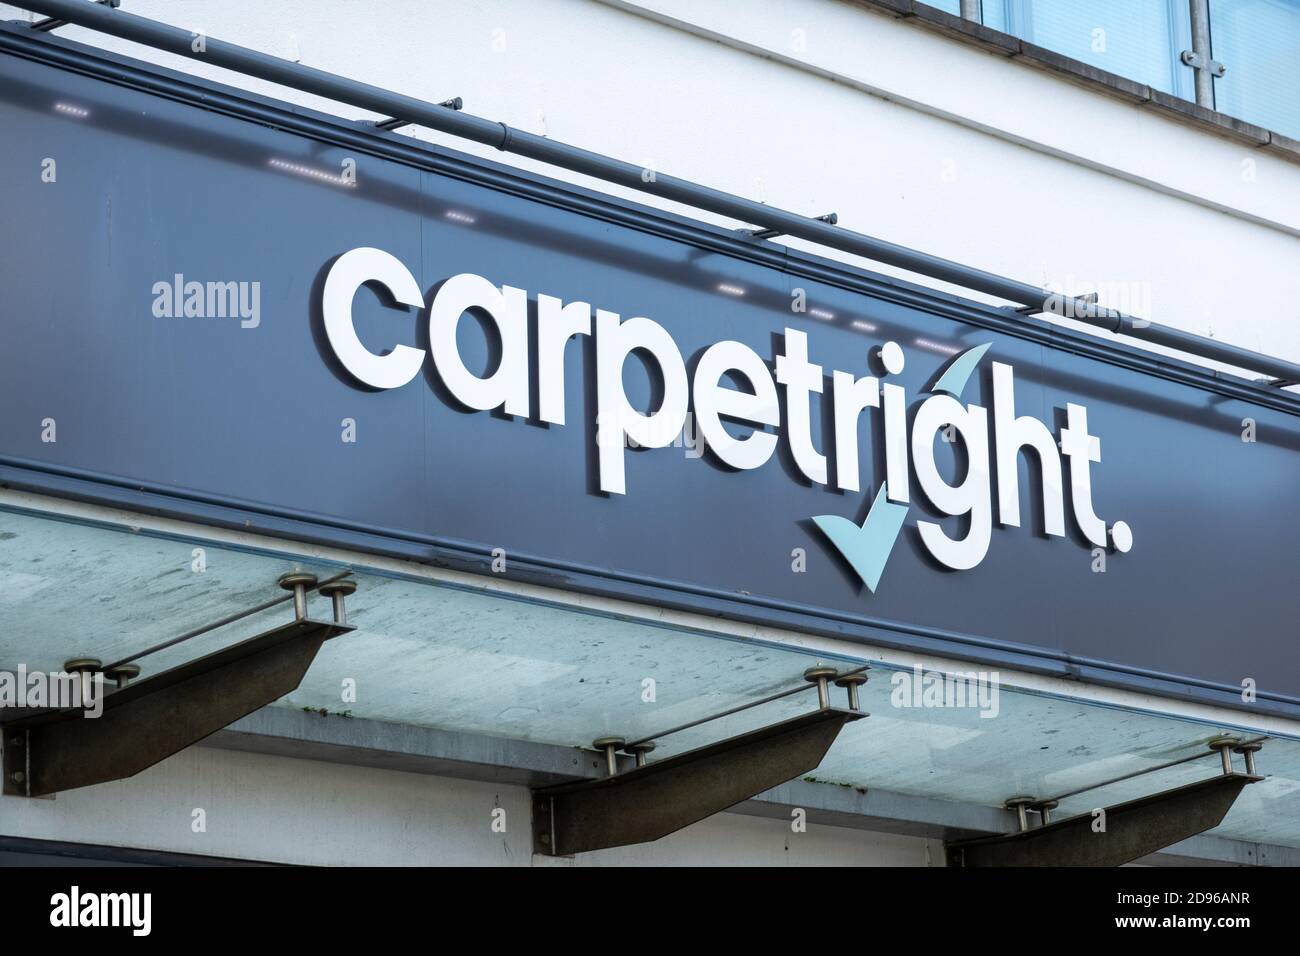 Carpetright Shop Front High Resolution Stock Photography And Images Alamy